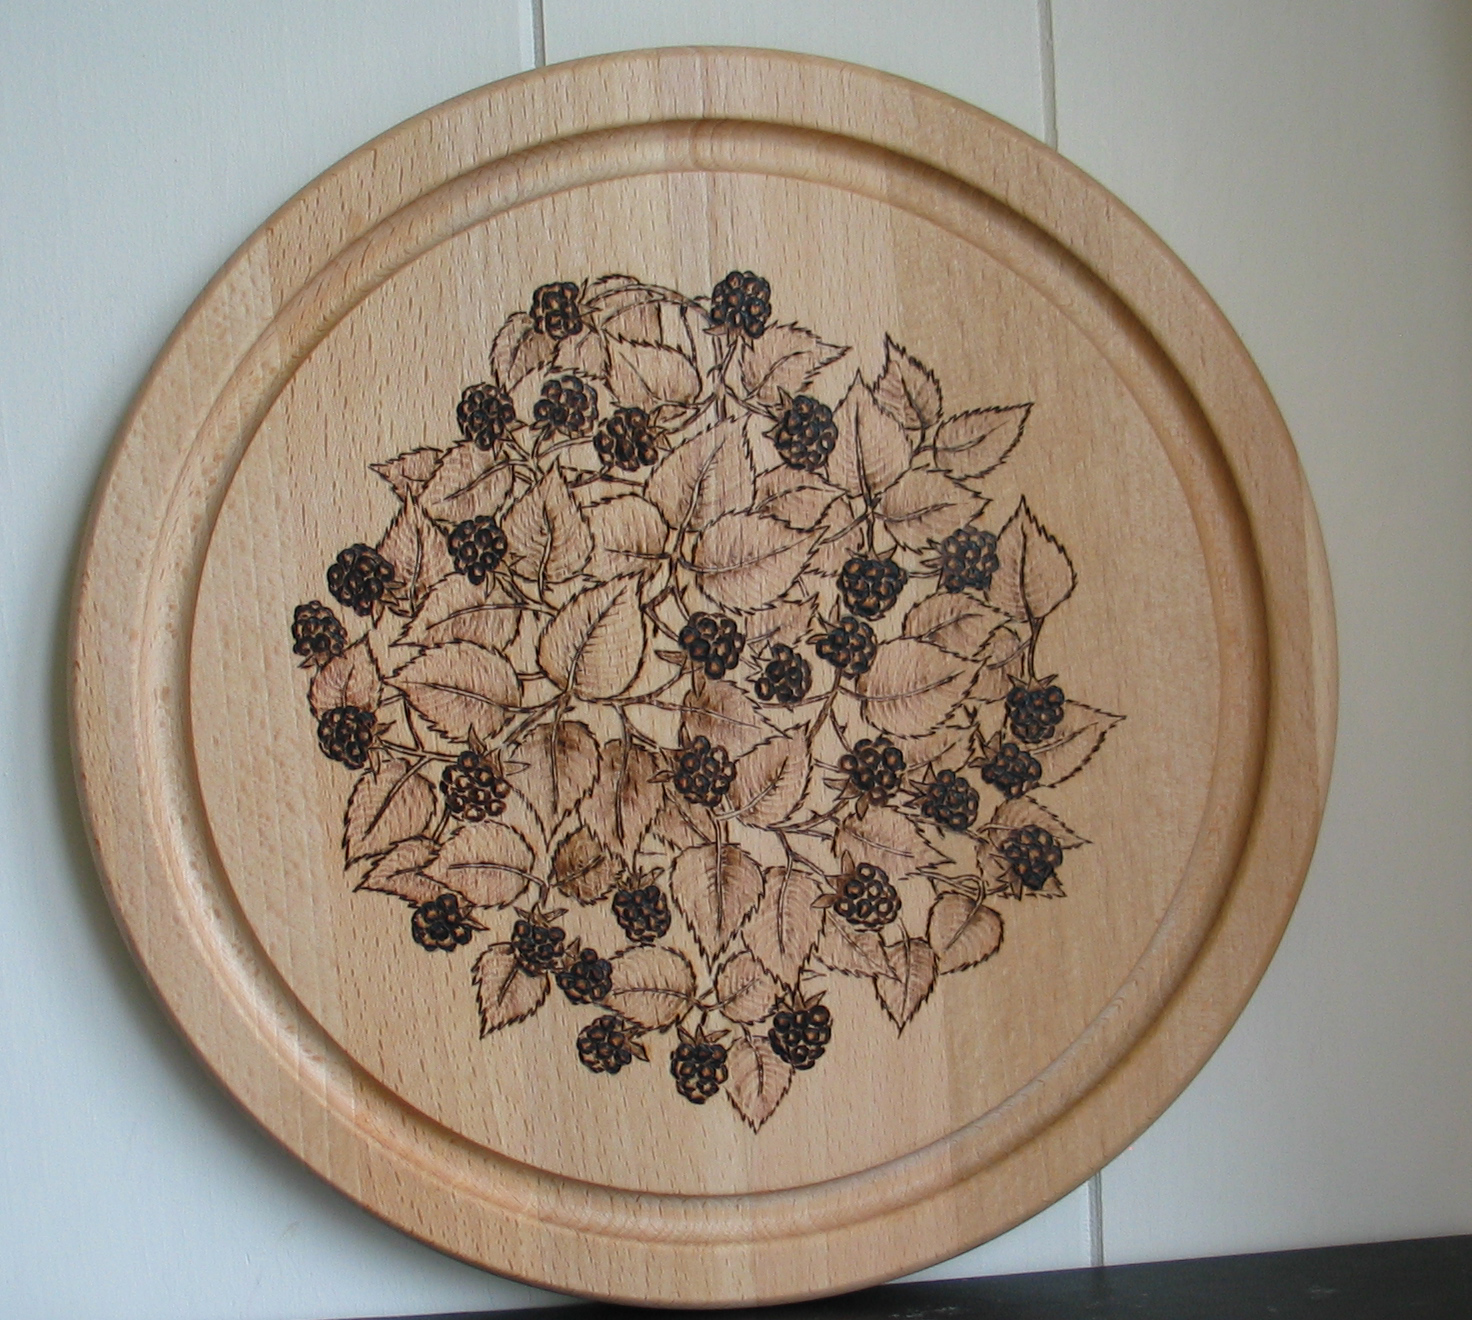 How To Make More Money As A Pyrography Artist: Wood Burning Art Prints